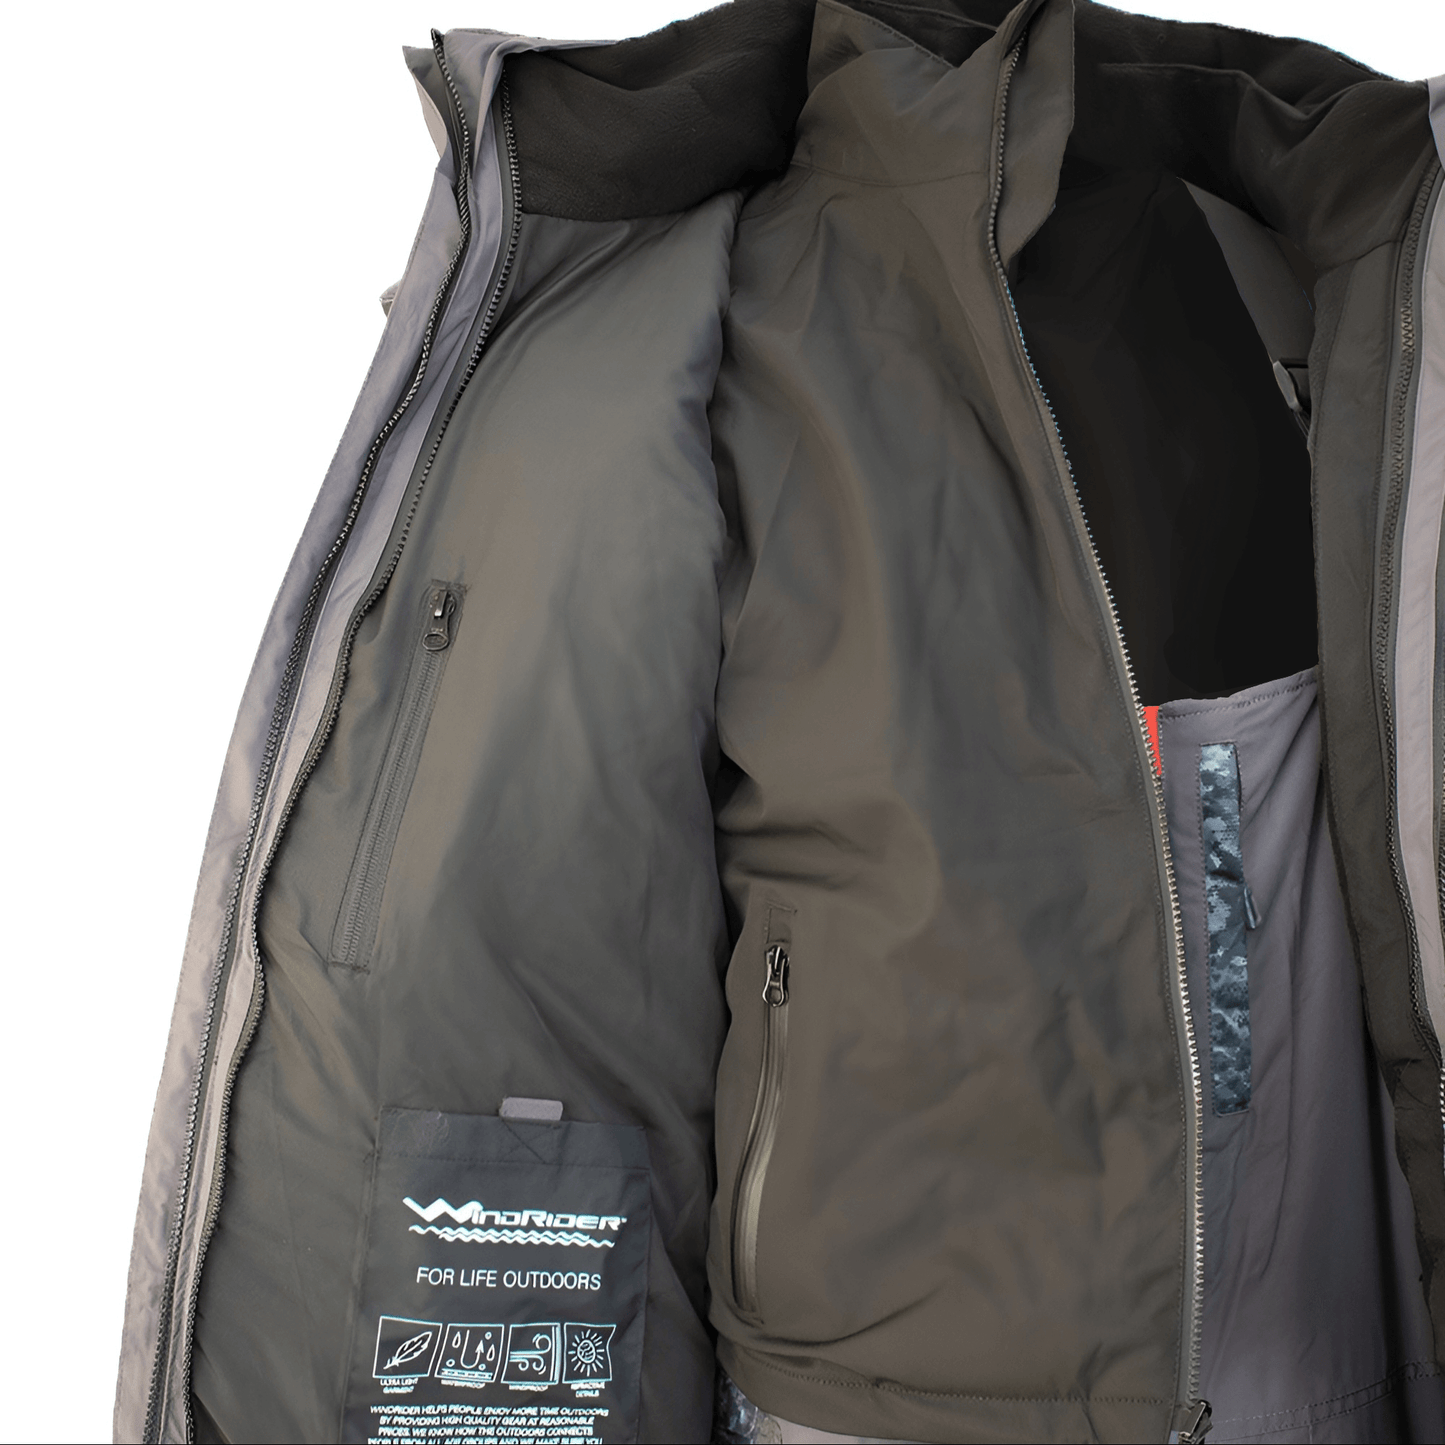 Removable inner shell on the float jacket